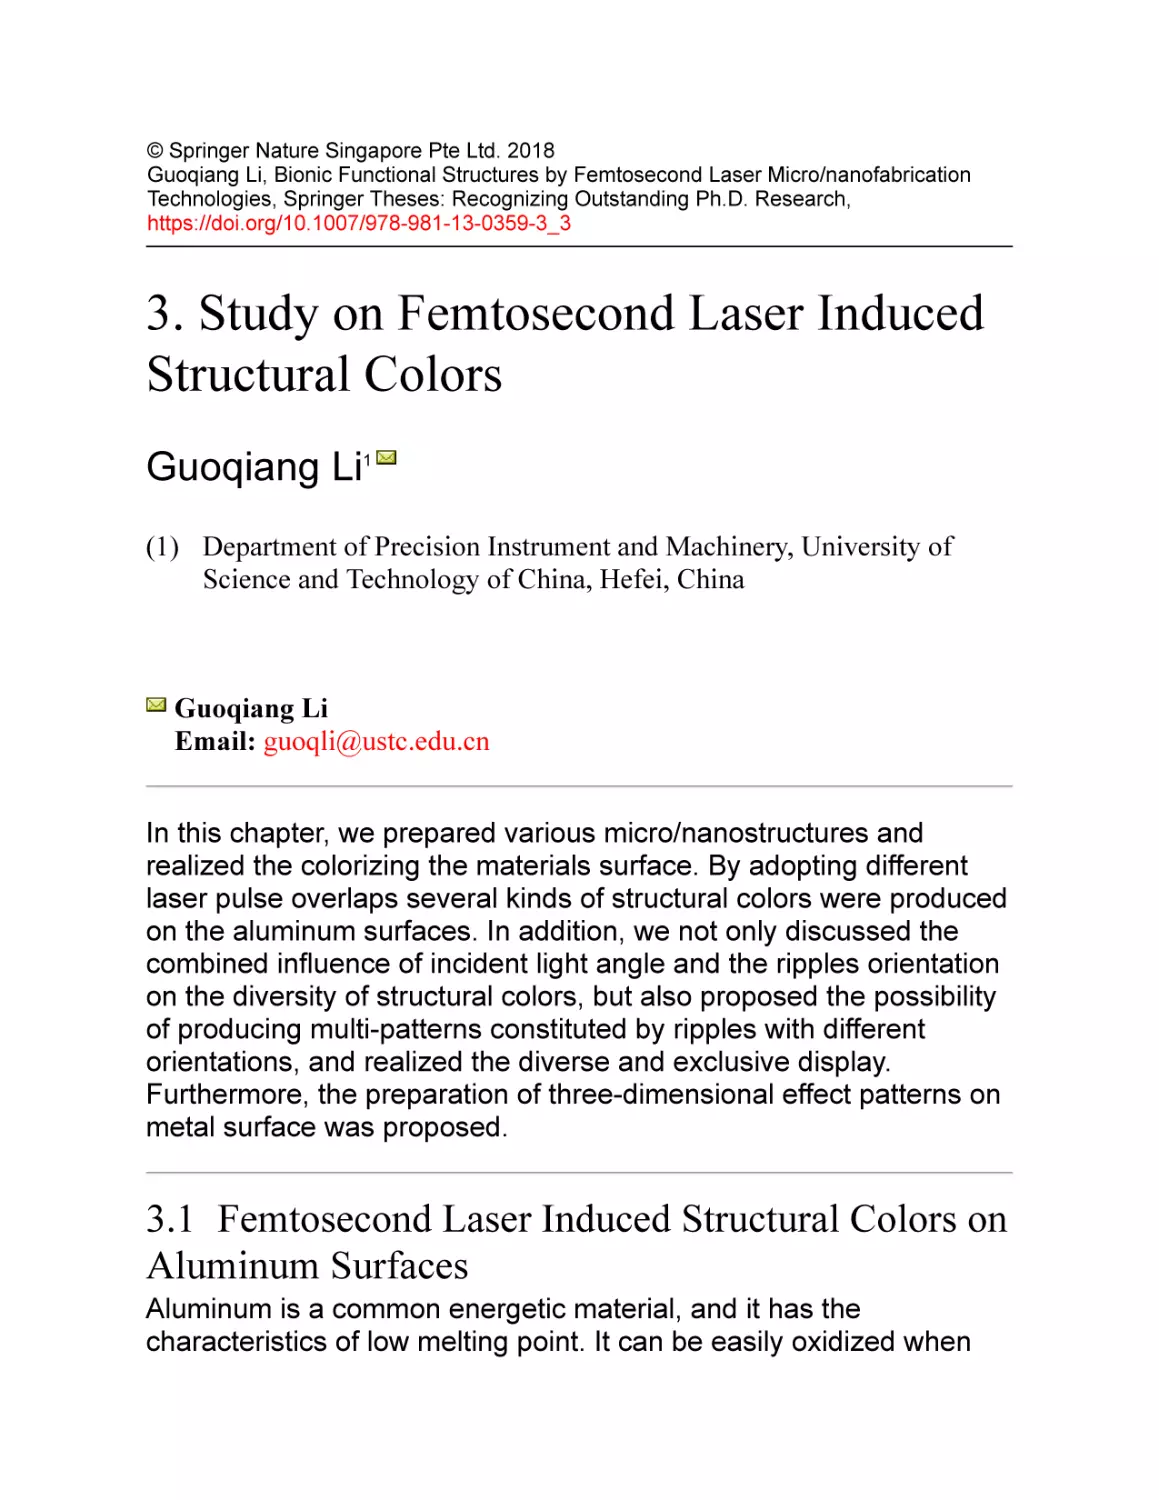 3. Study on Femtosecond Laser Induced Structural Colors